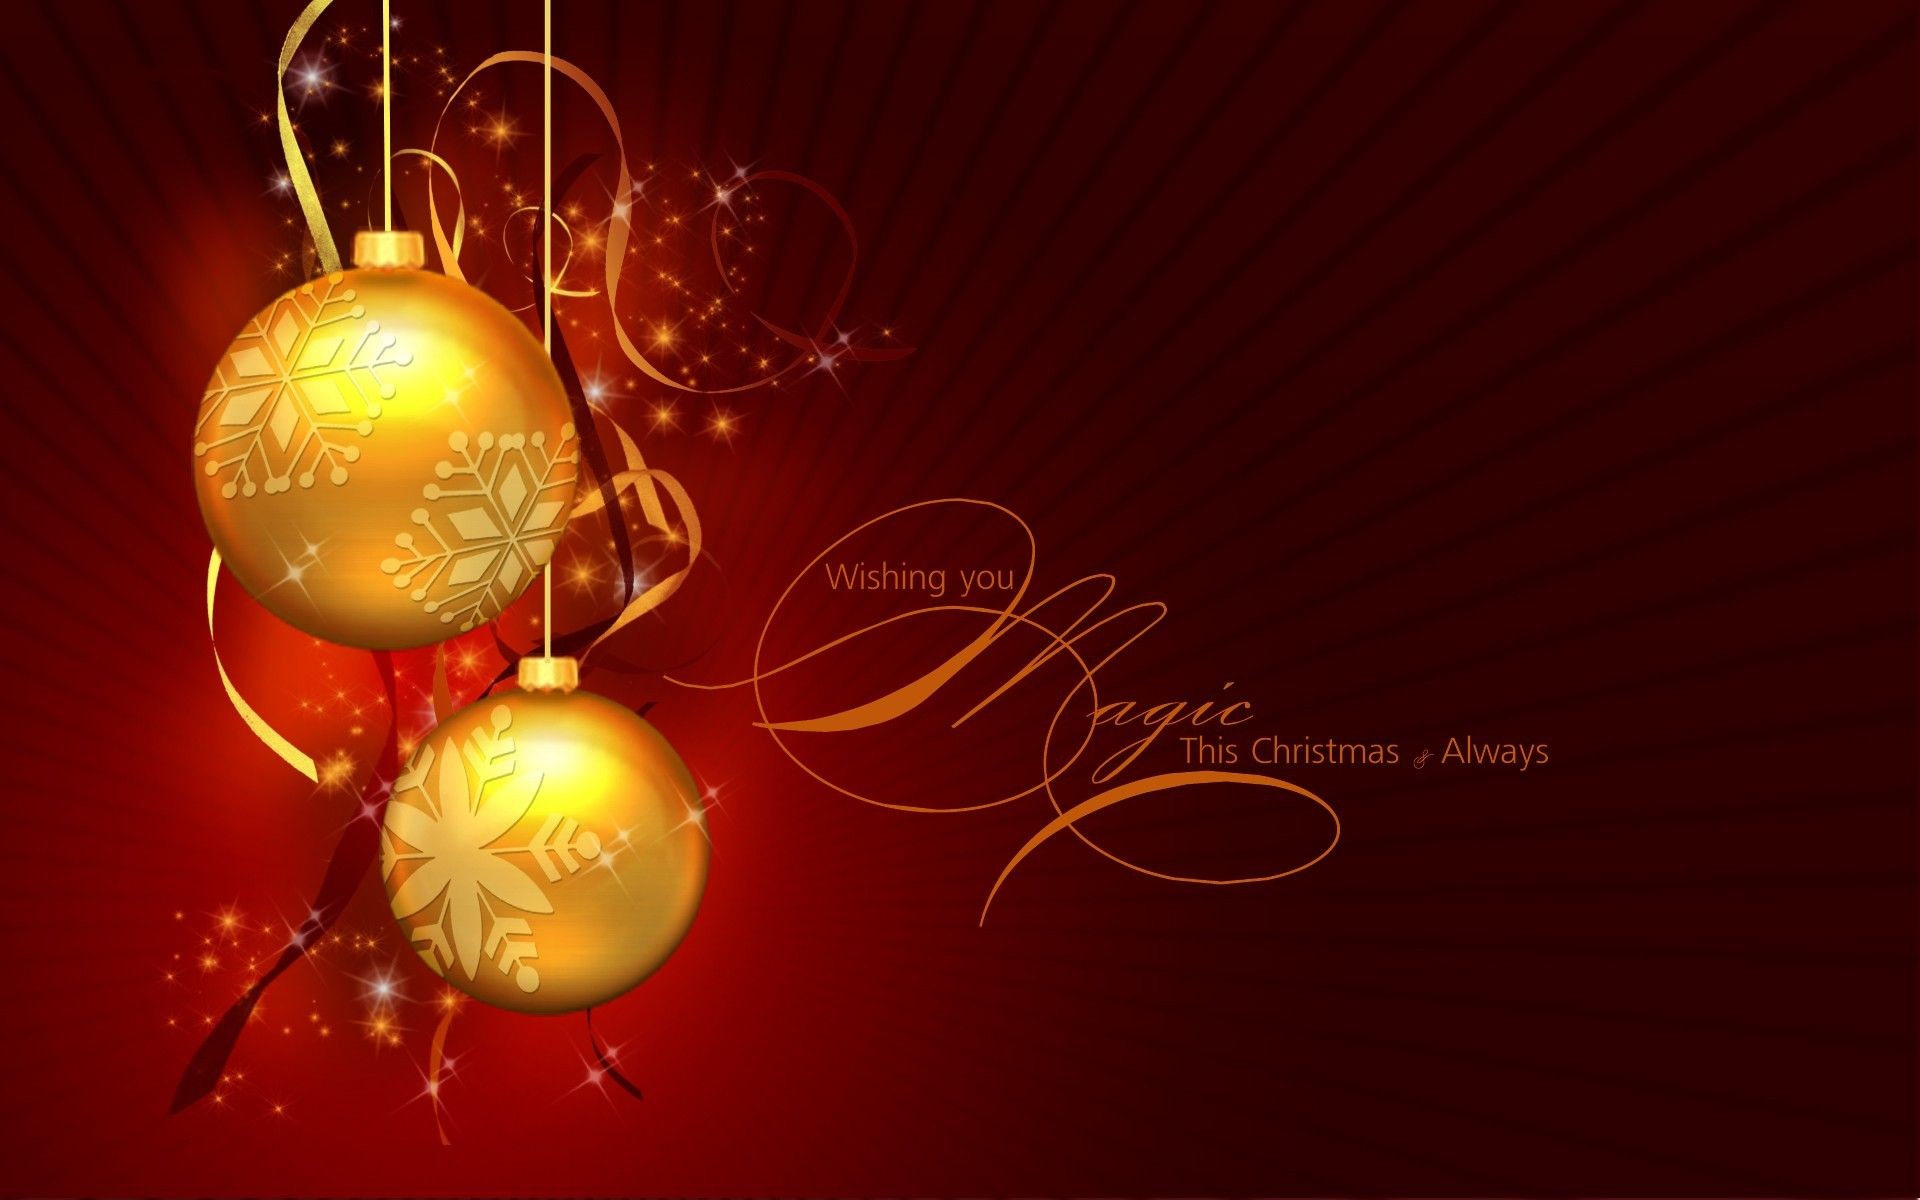 89530 Christmas Religious Background Images Stock Photos  Vectors   Shutterstock